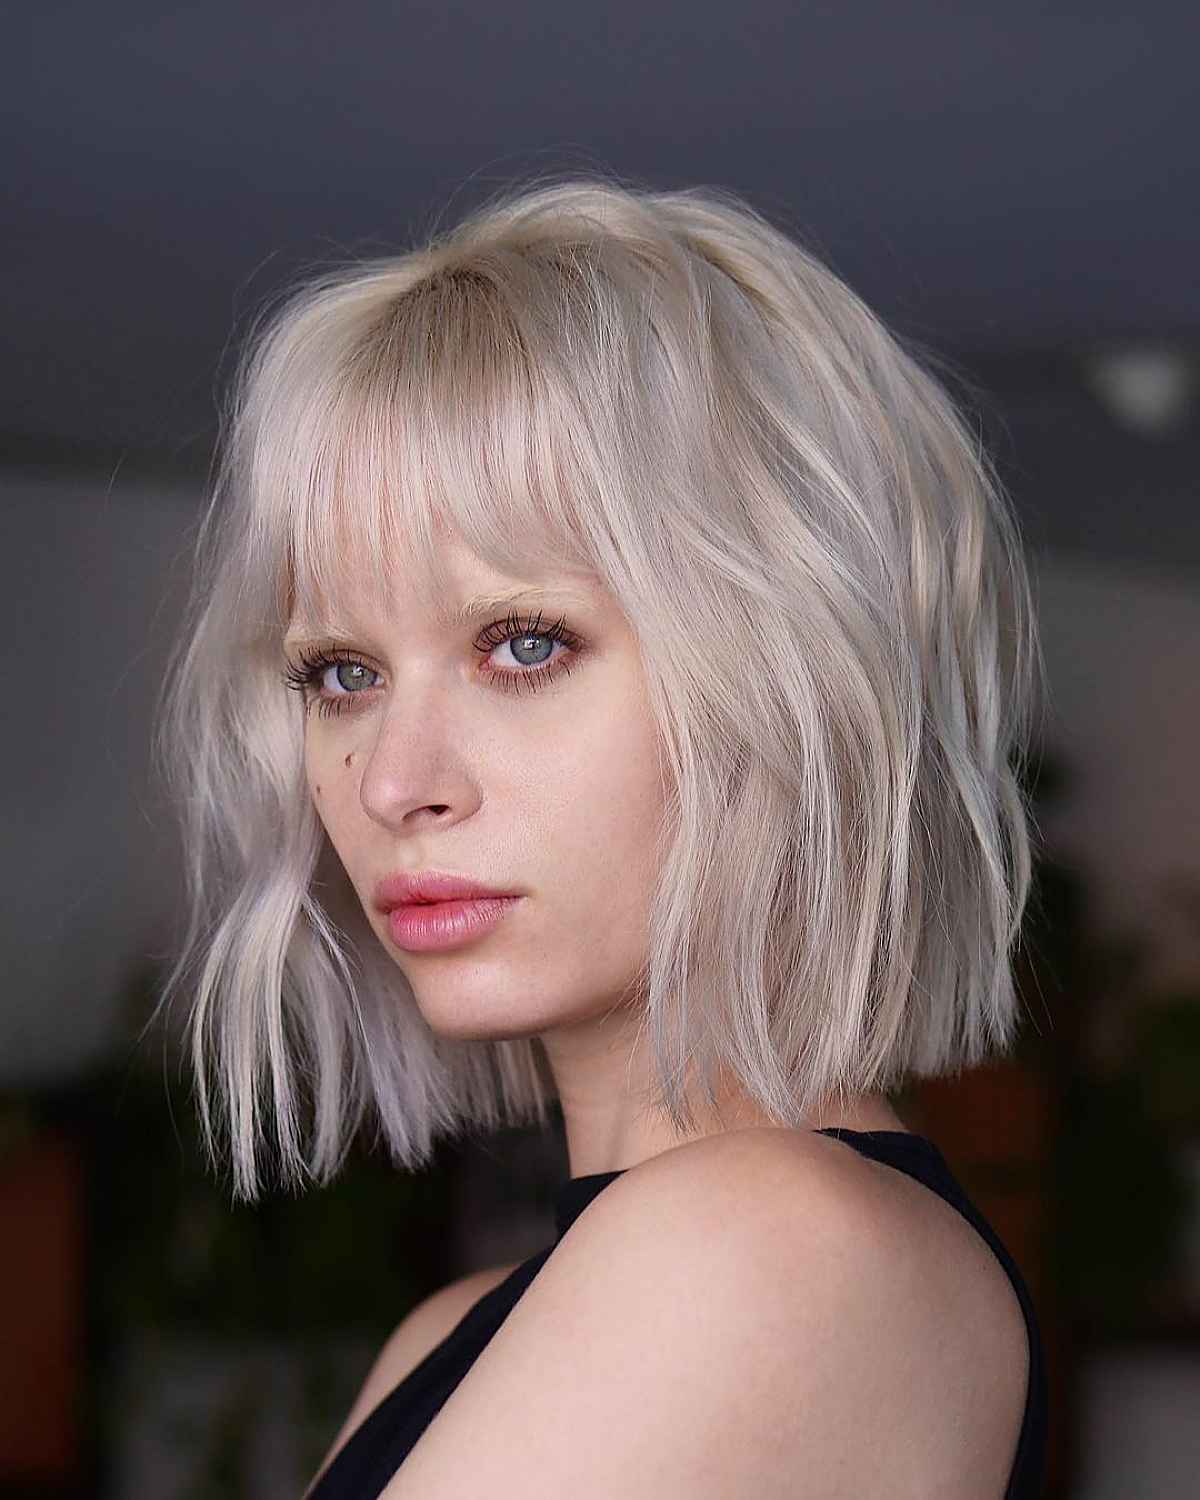 A long platinum blonde bob with waves and sipy bangs is a very eye catching idea to rock if you want to stand out